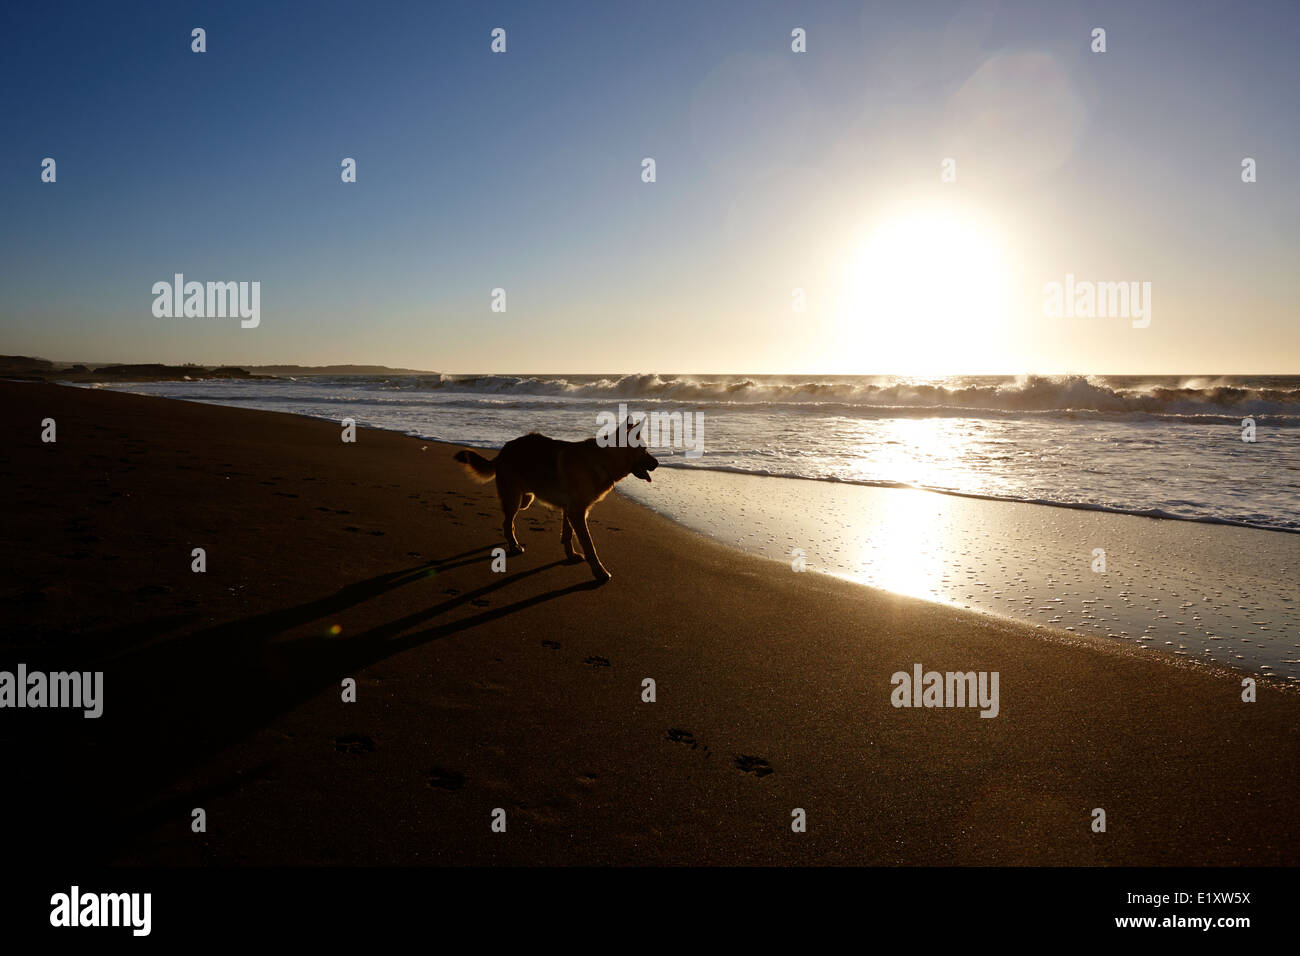 german shepherd dog walking along beach with sun setting on the pacific ocean los pellines chile Stock Photo